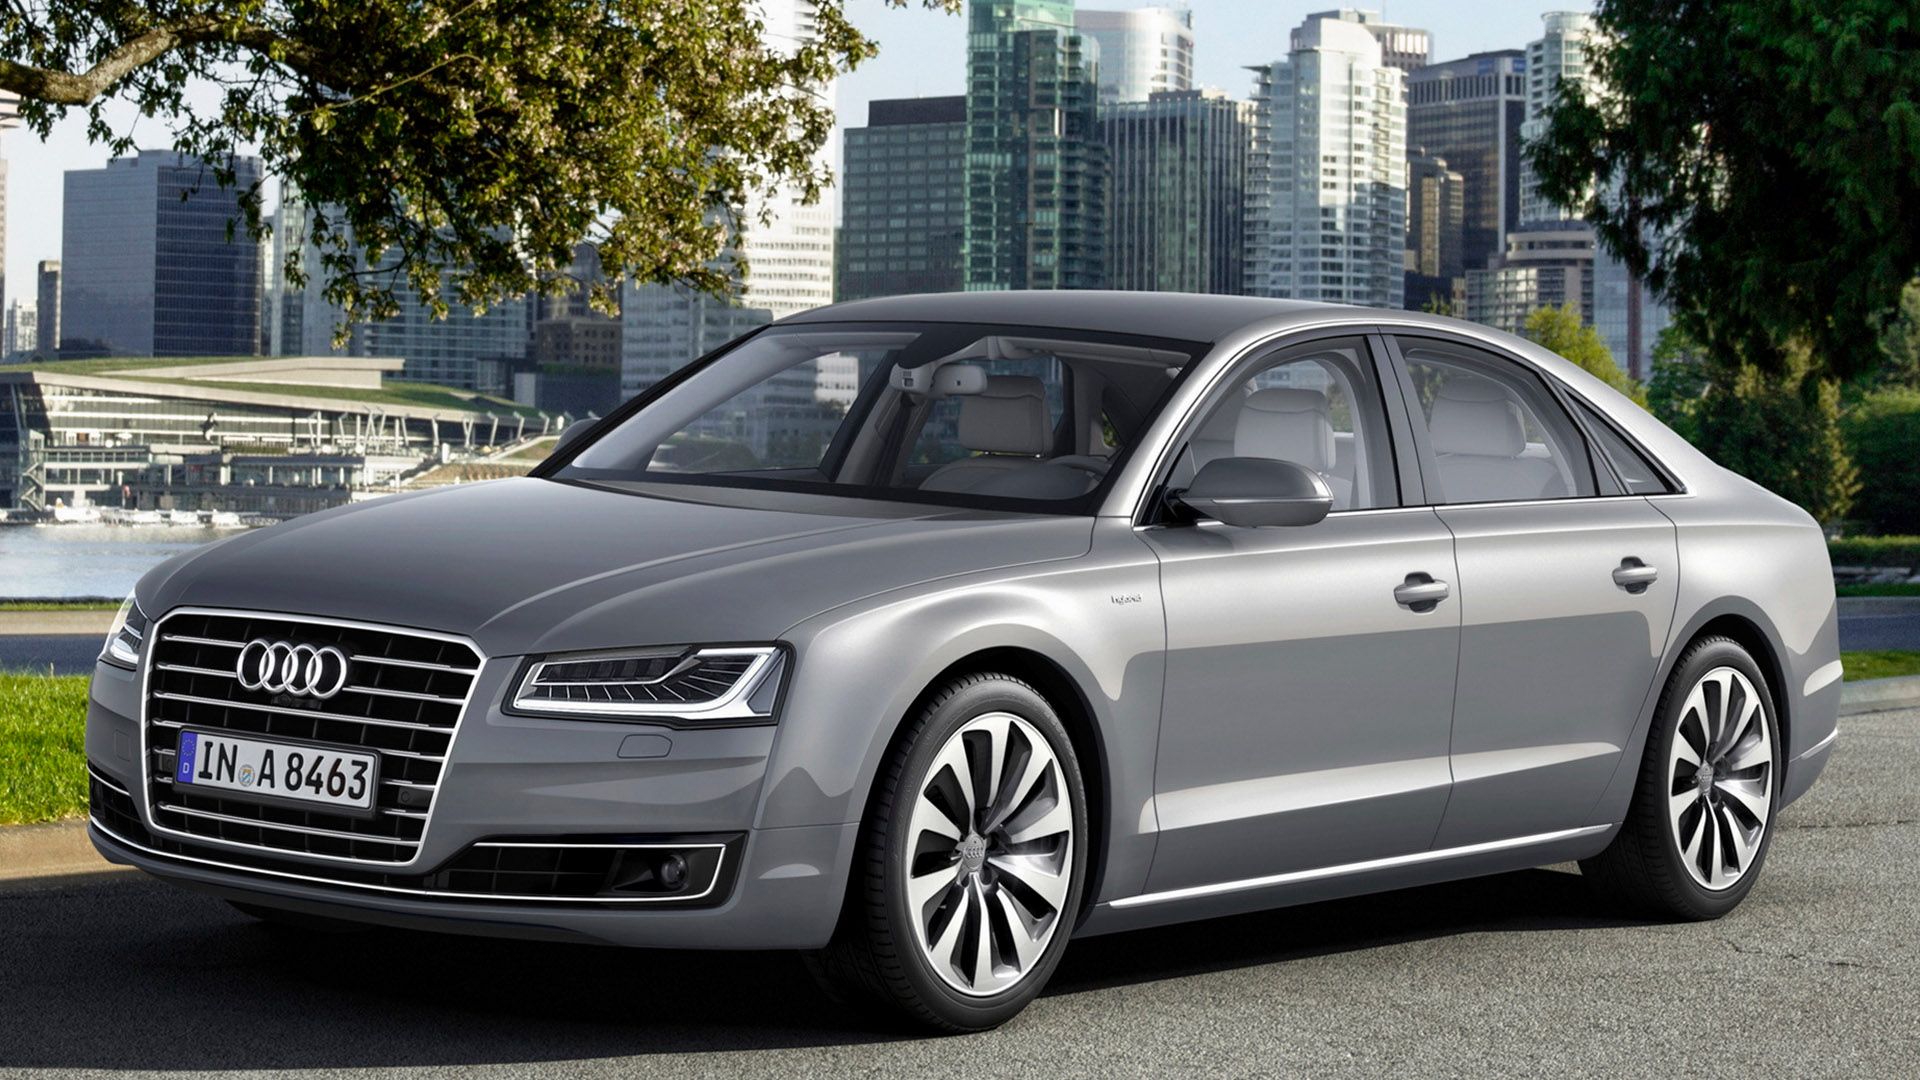 Matt grey Audi A8 hybrid driving on a road, in the background you can see water and a skyline with skyscrapers